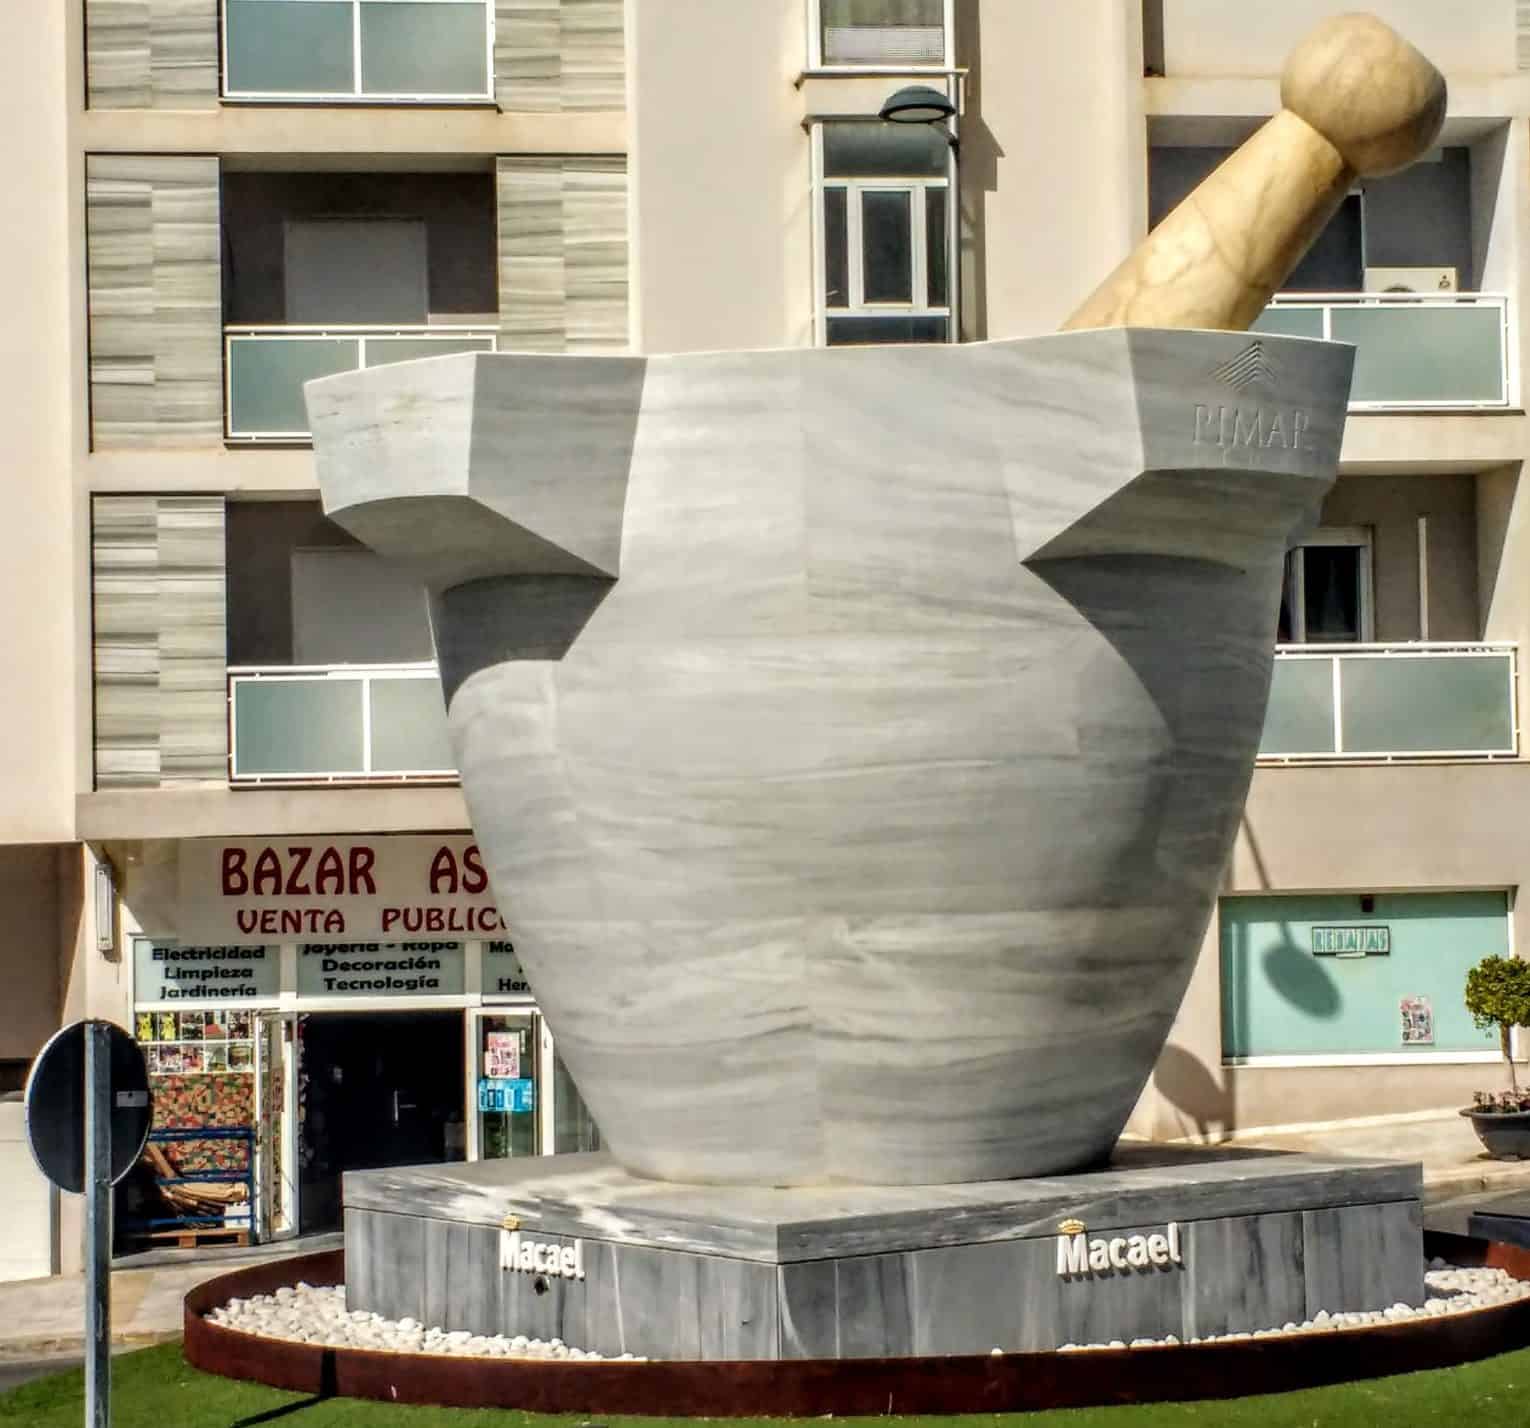 38 pieces of the World's Strangest Art from statues to monuments 